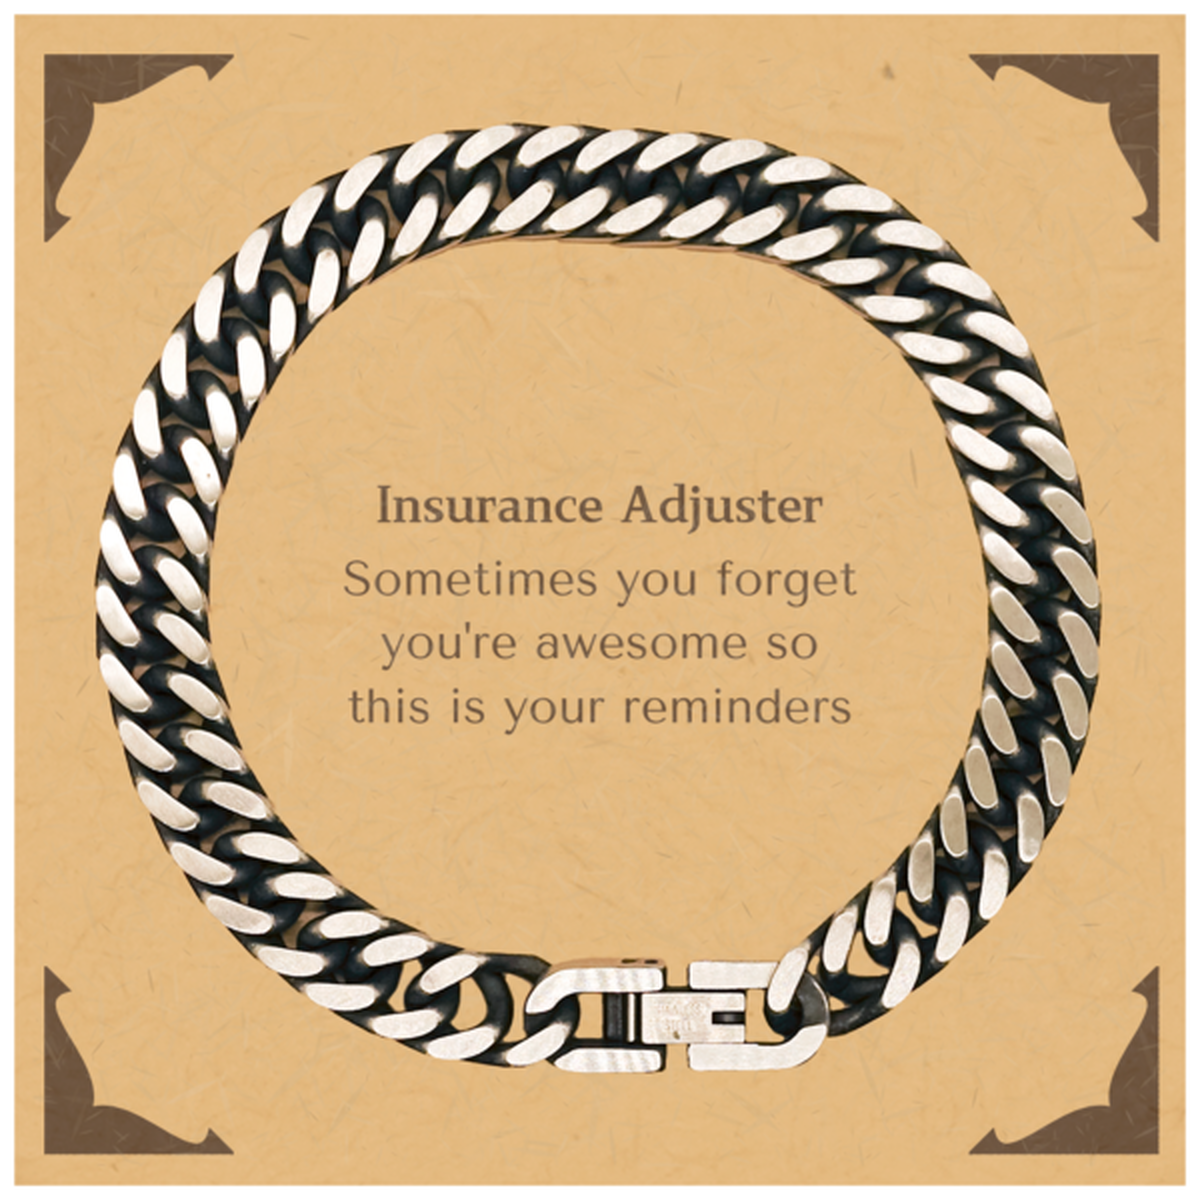 Sentimental Insurance Adjuster Cuban Link Chain Bracelet, Insurance Adjuster Sometimes you forget you're awesome so this is your reminders, Graduation Christmas Birthday Gifts for Insurance Adjuster, Men, Women, Coworkers